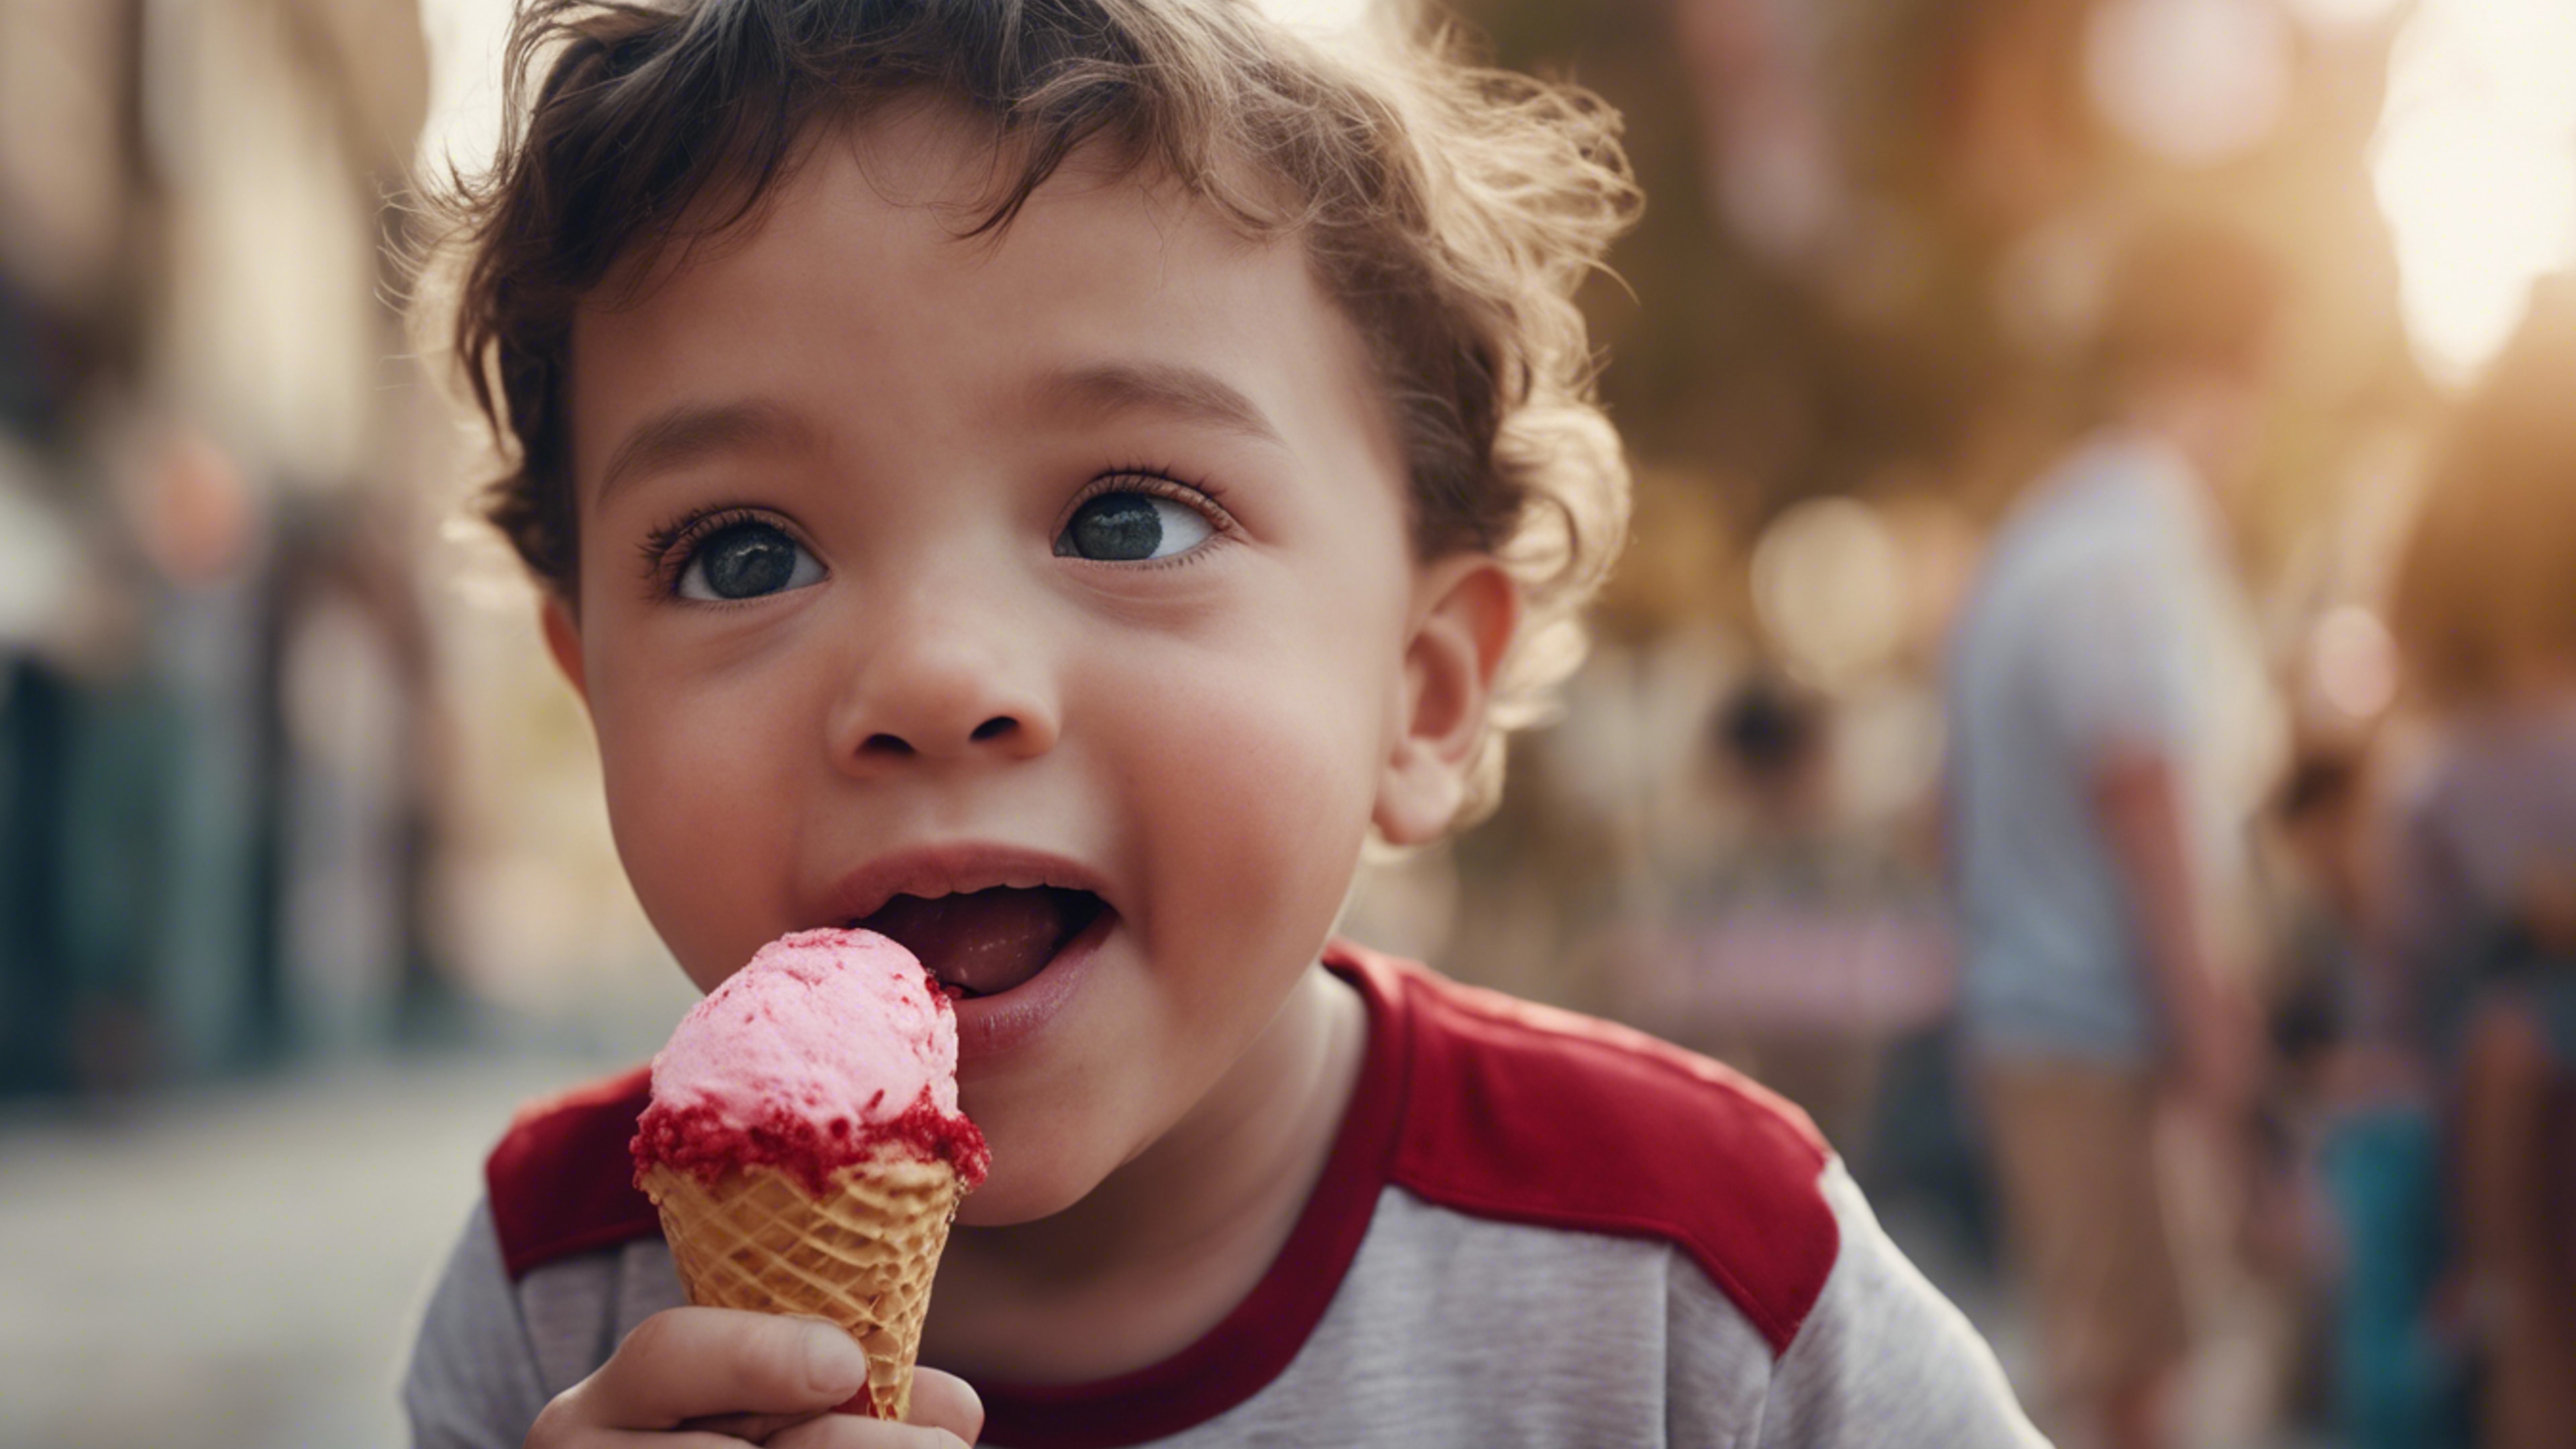 A small child delighting in a red velvet ice cream cone, with a wide-eyed expression of joy on his face.壁紙[7a3fbd1e60614c42931f]